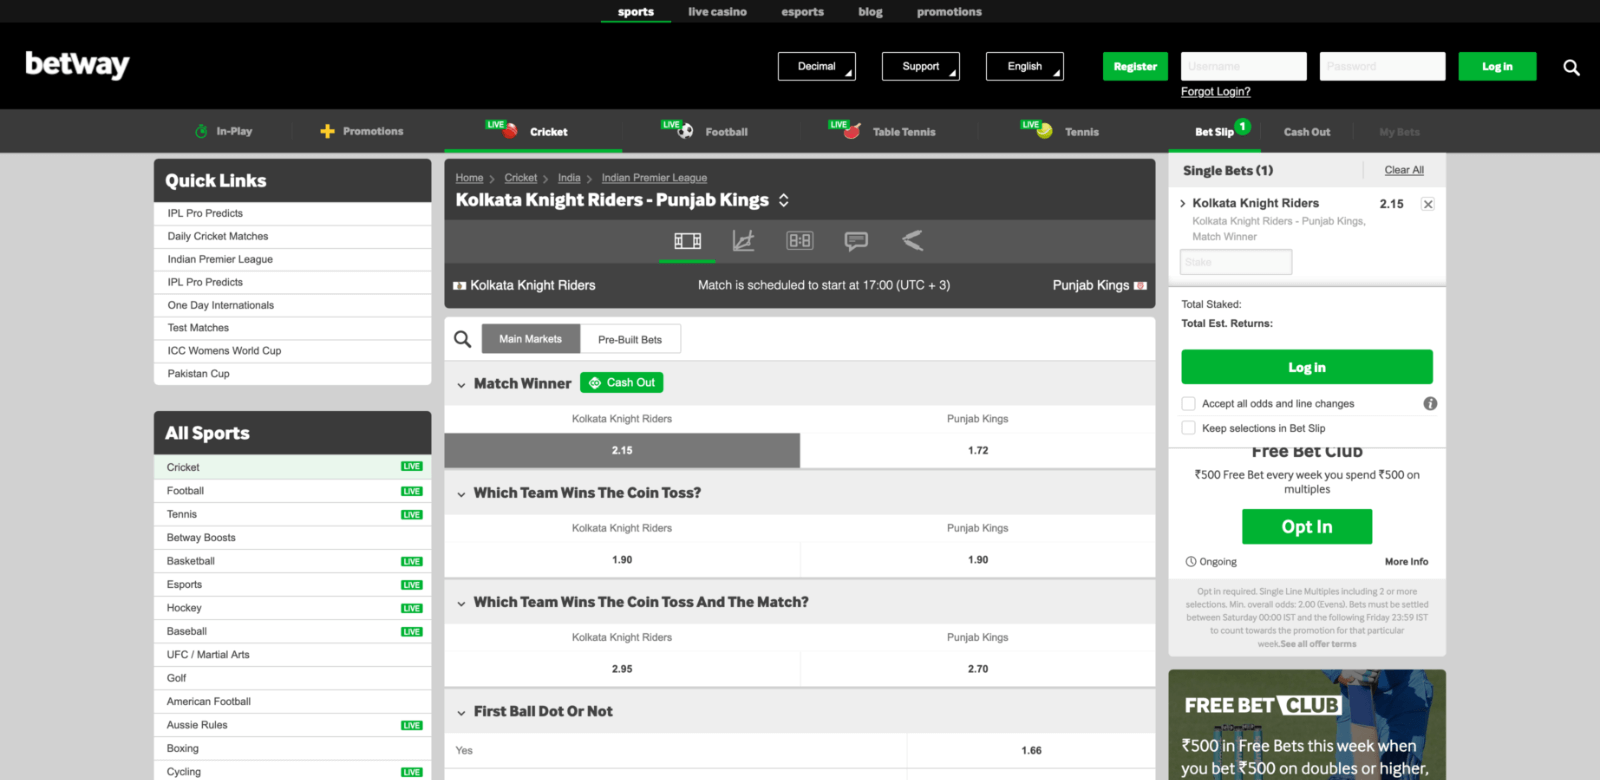 Betting and odds page